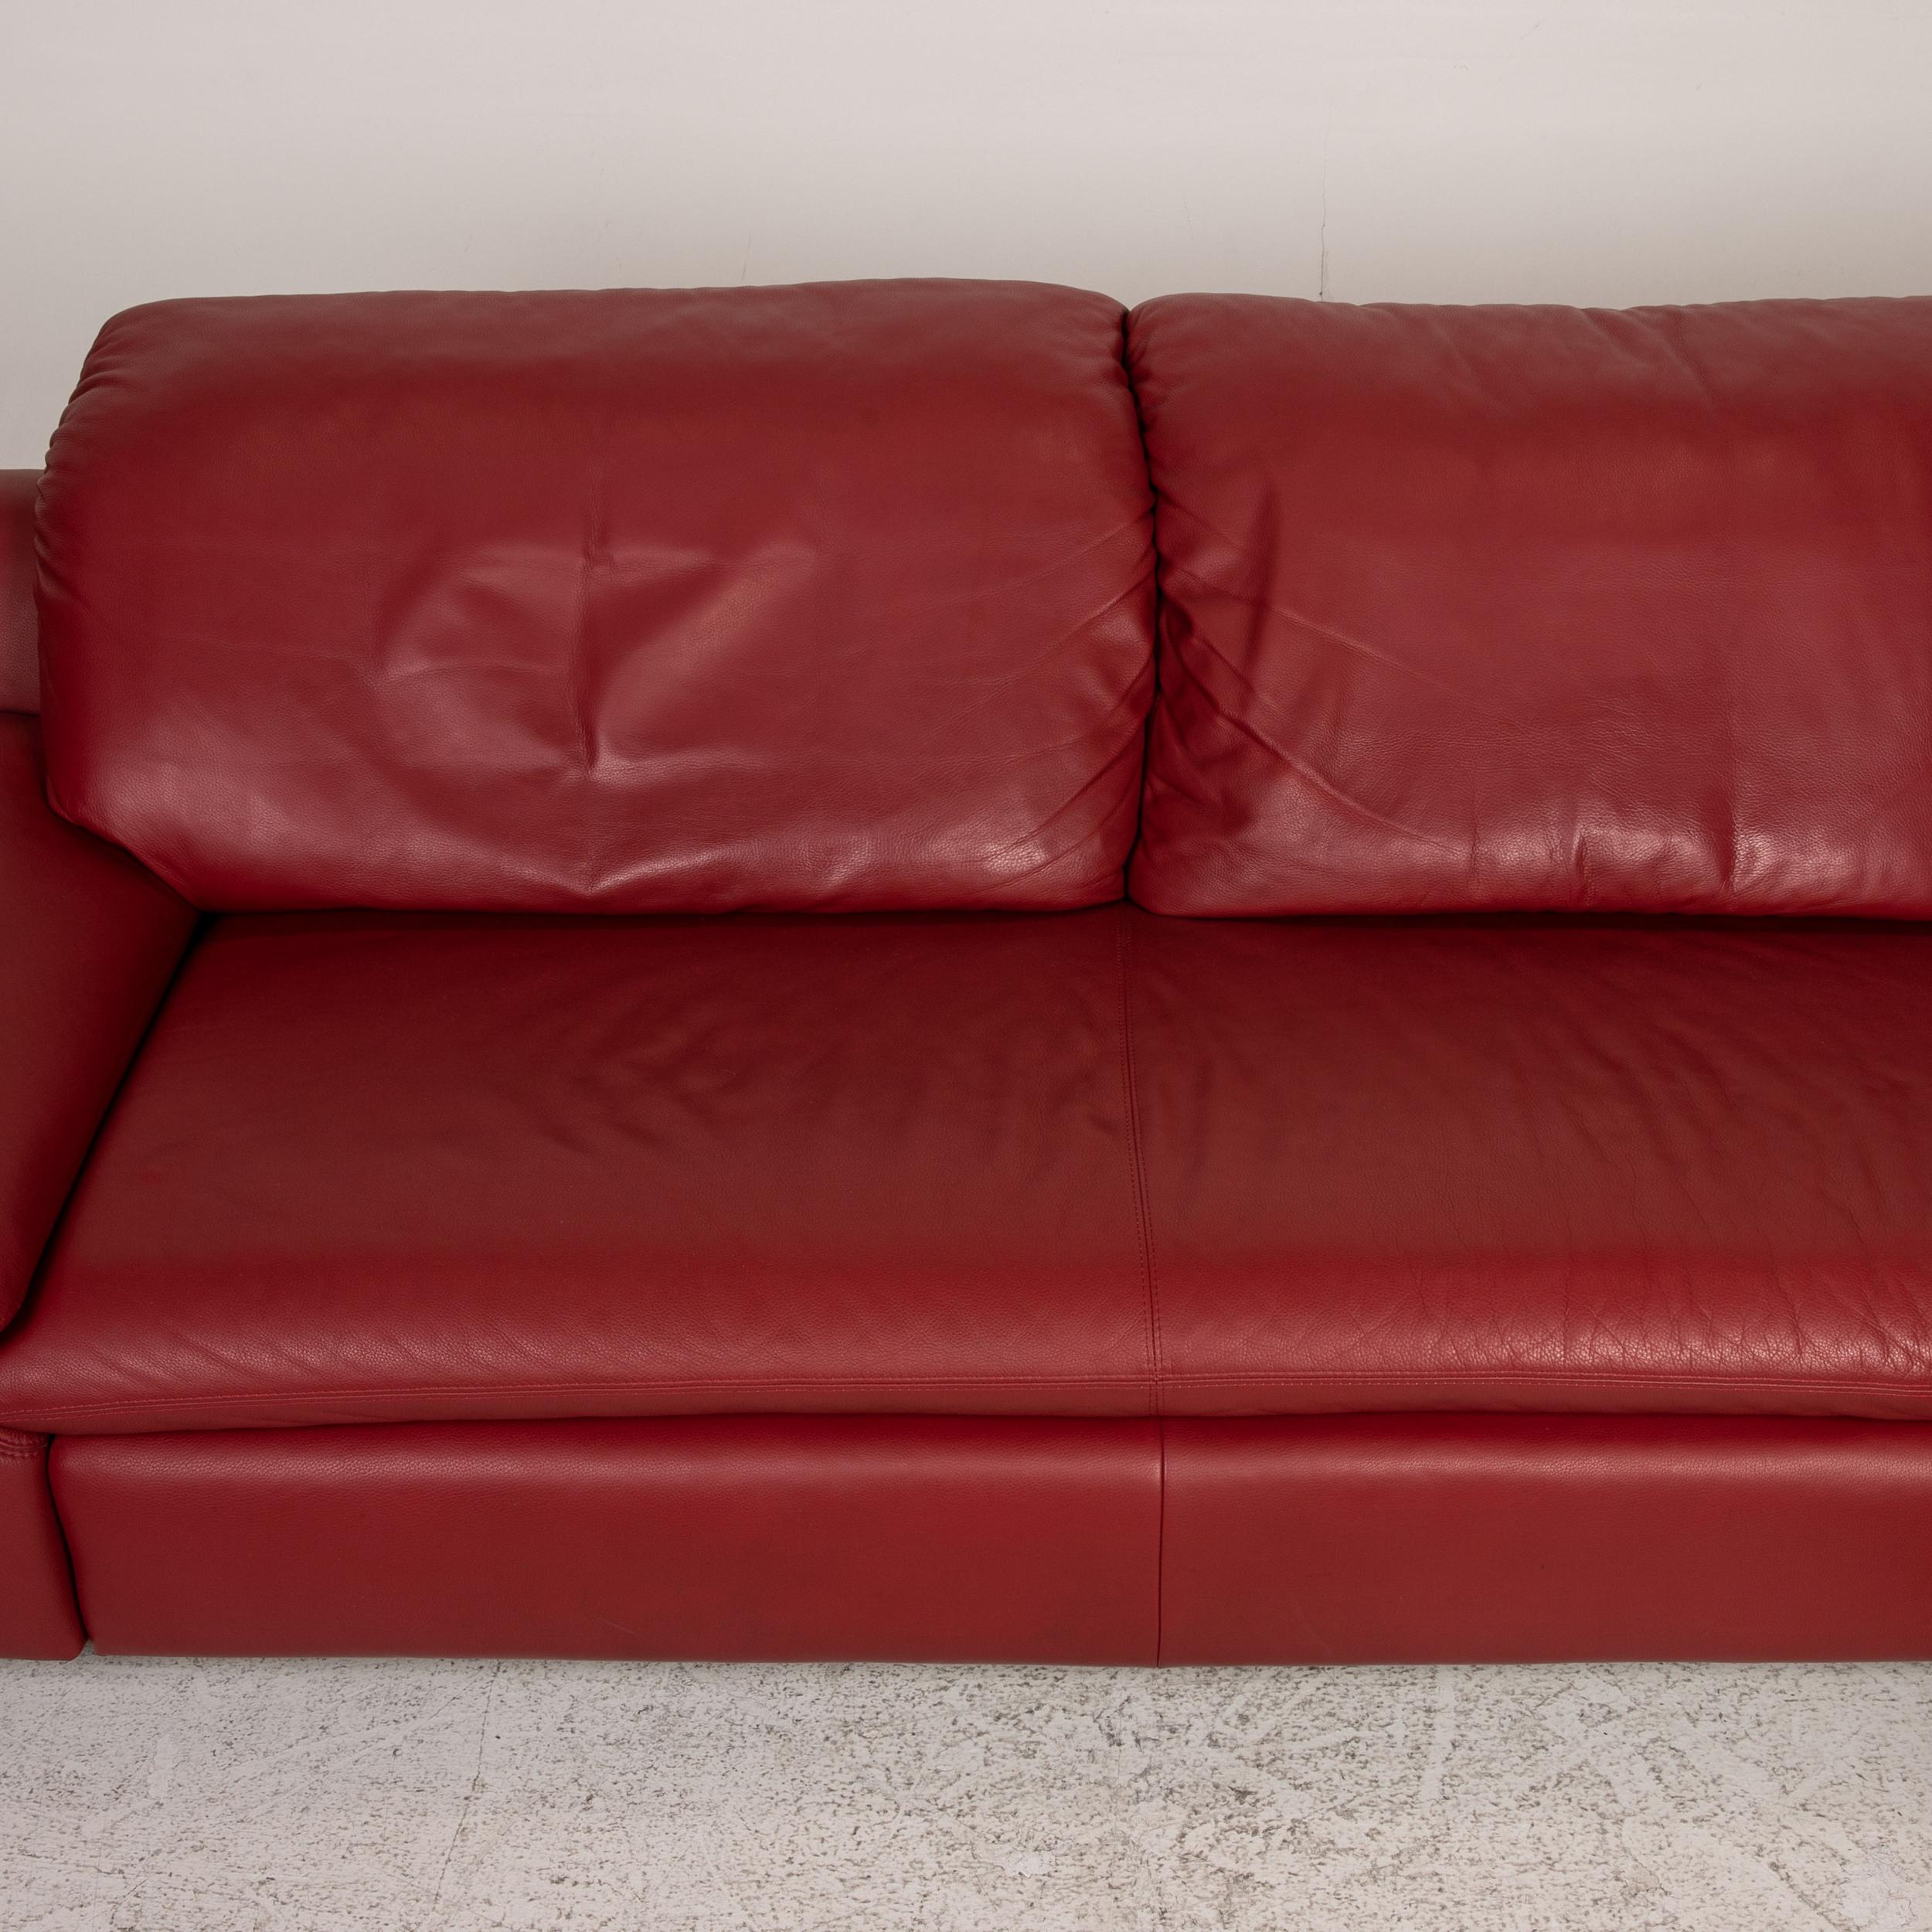 Willi Schillig Amore Leather Sofa Red Corner Sofa Couch Function In Good Condition For Sale In Cologne, DE